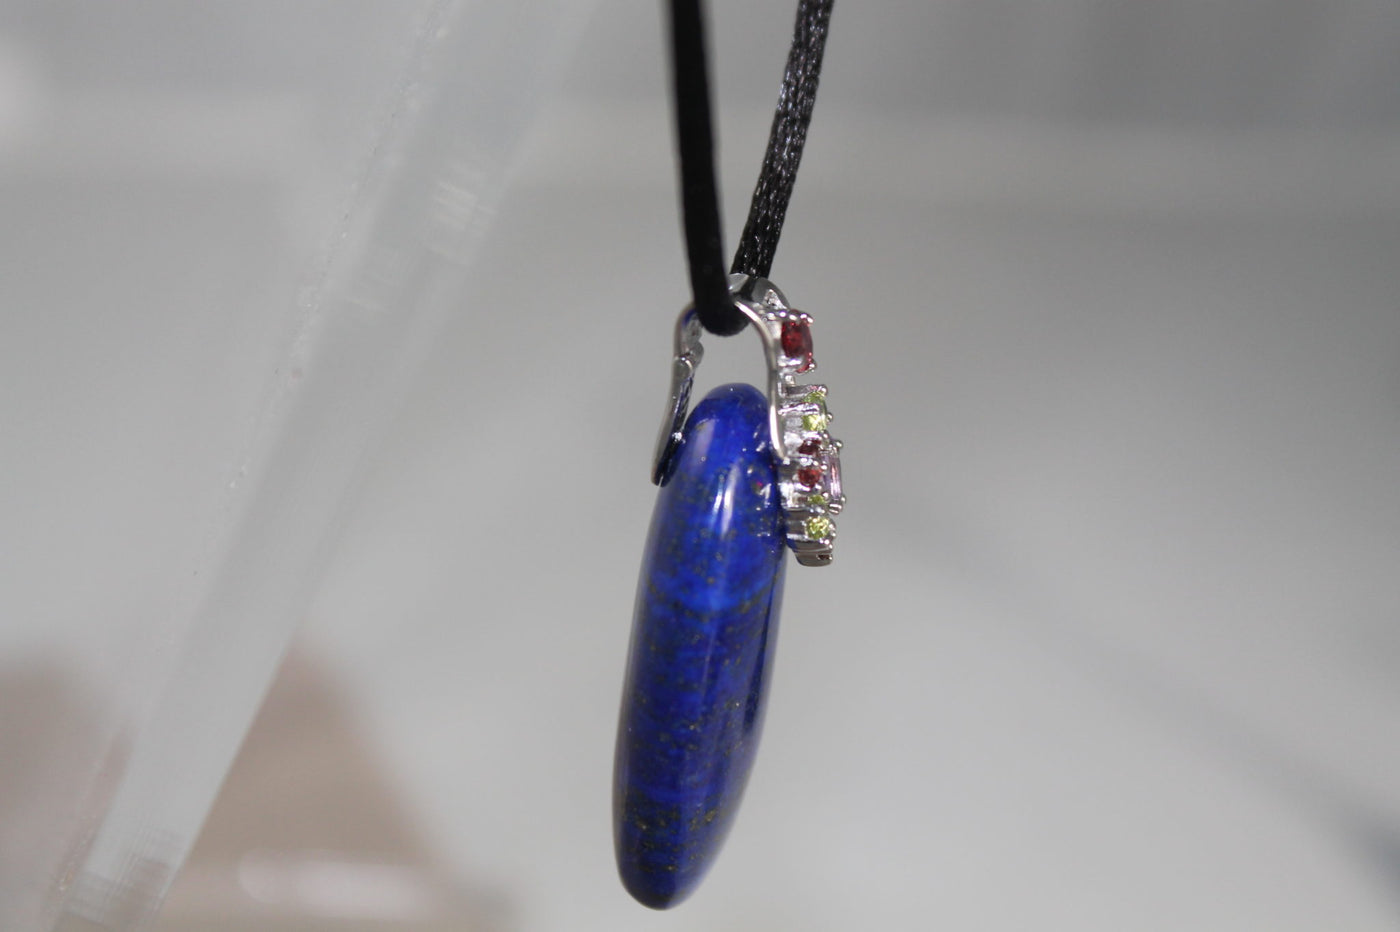 Lapis and gems pendant set in sterling silver